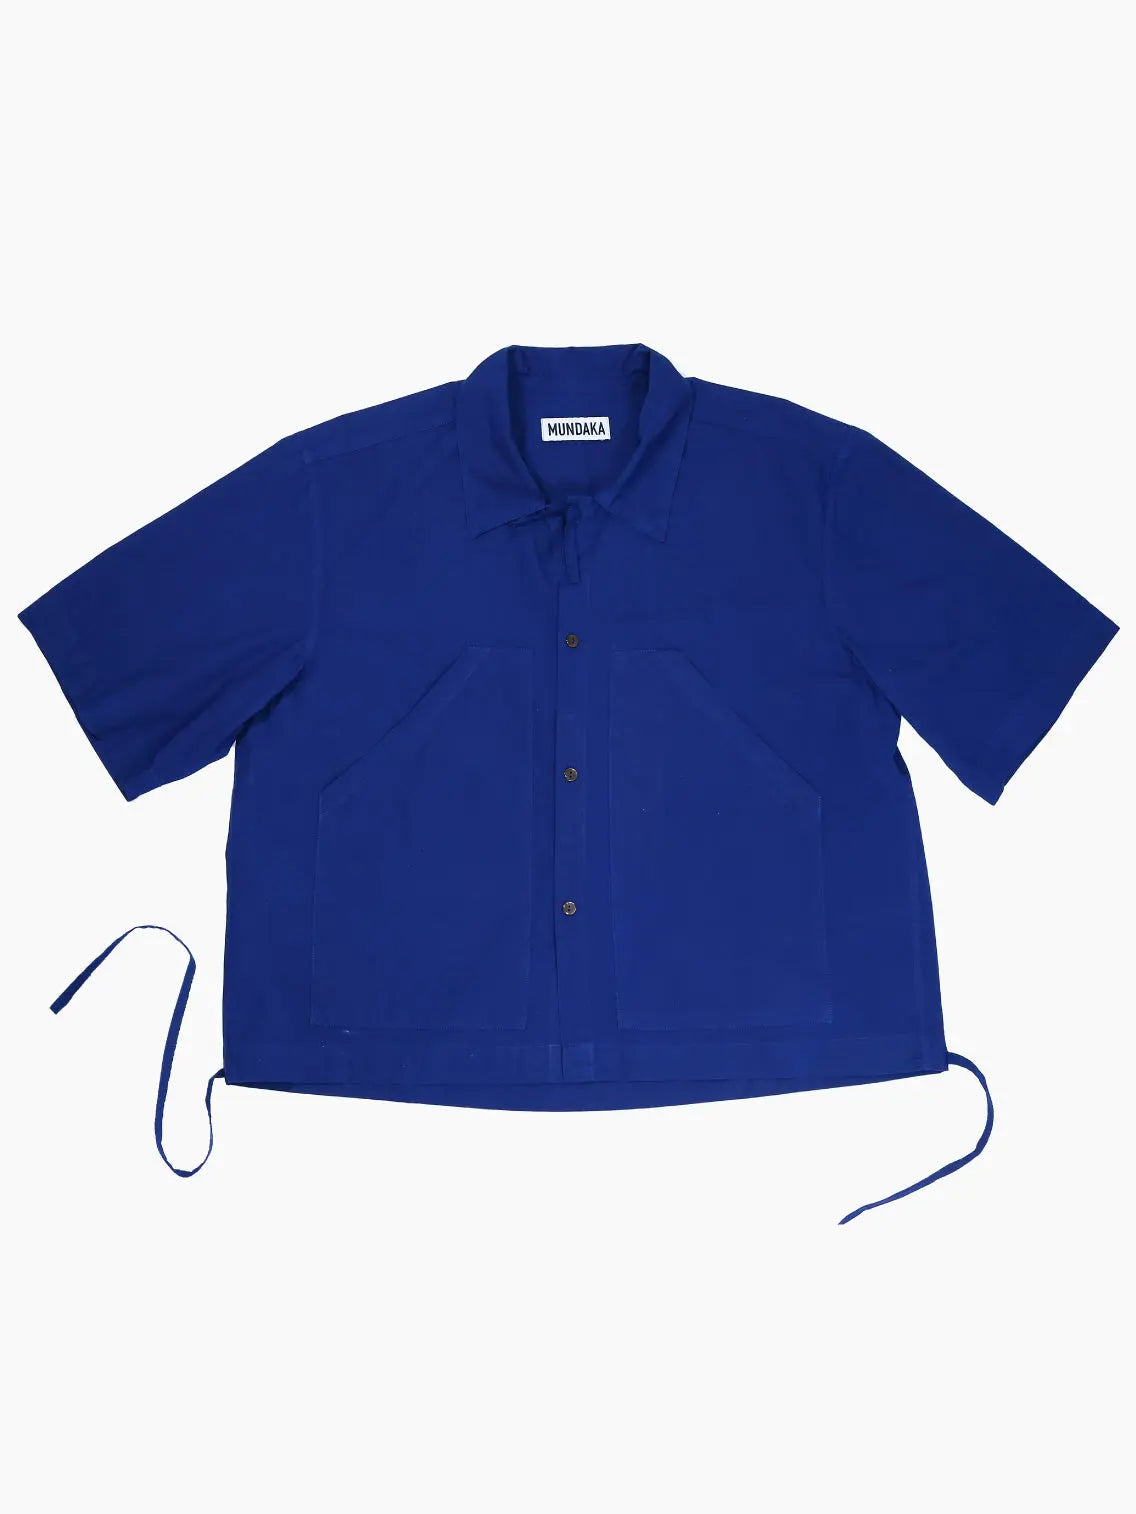 A Boxy Shirt Navy with a relaxed fit. It features a pointed collar, two large front pockets, and drawstrings at the side hems. The brand label "Mundaka" is visible inside the collar. Available now at Bassal Store in Barcelona.